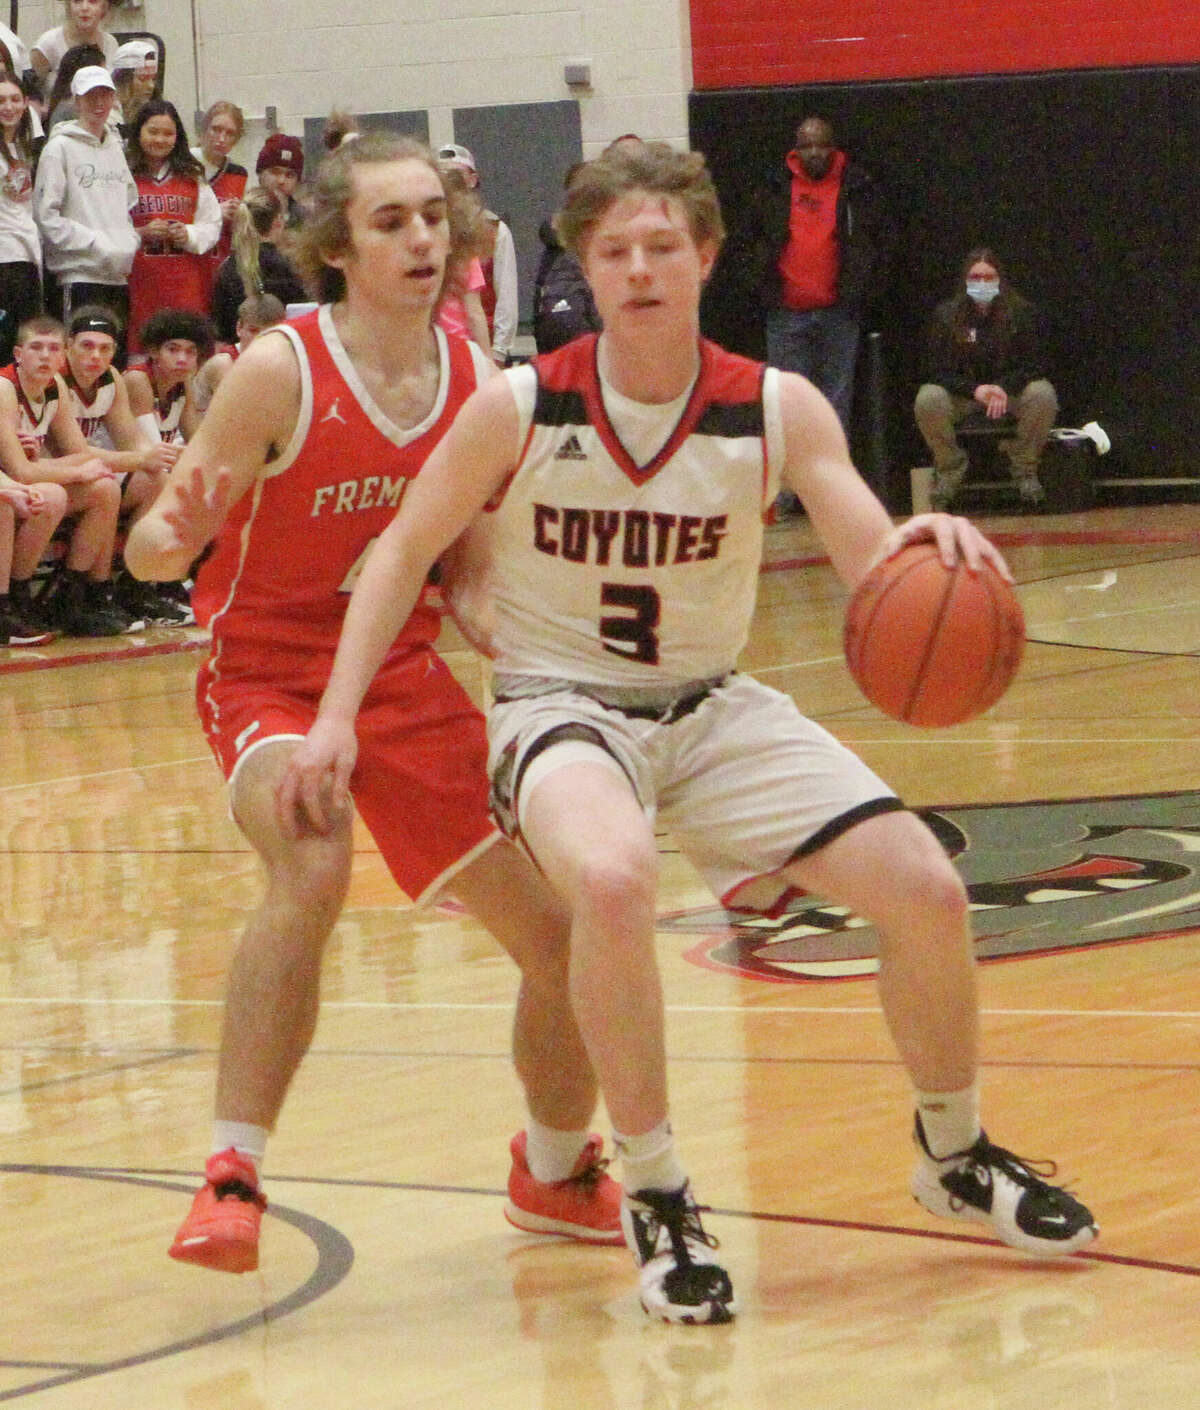 The Reed City boys' basketball team defeated Fremont at home Friday night.